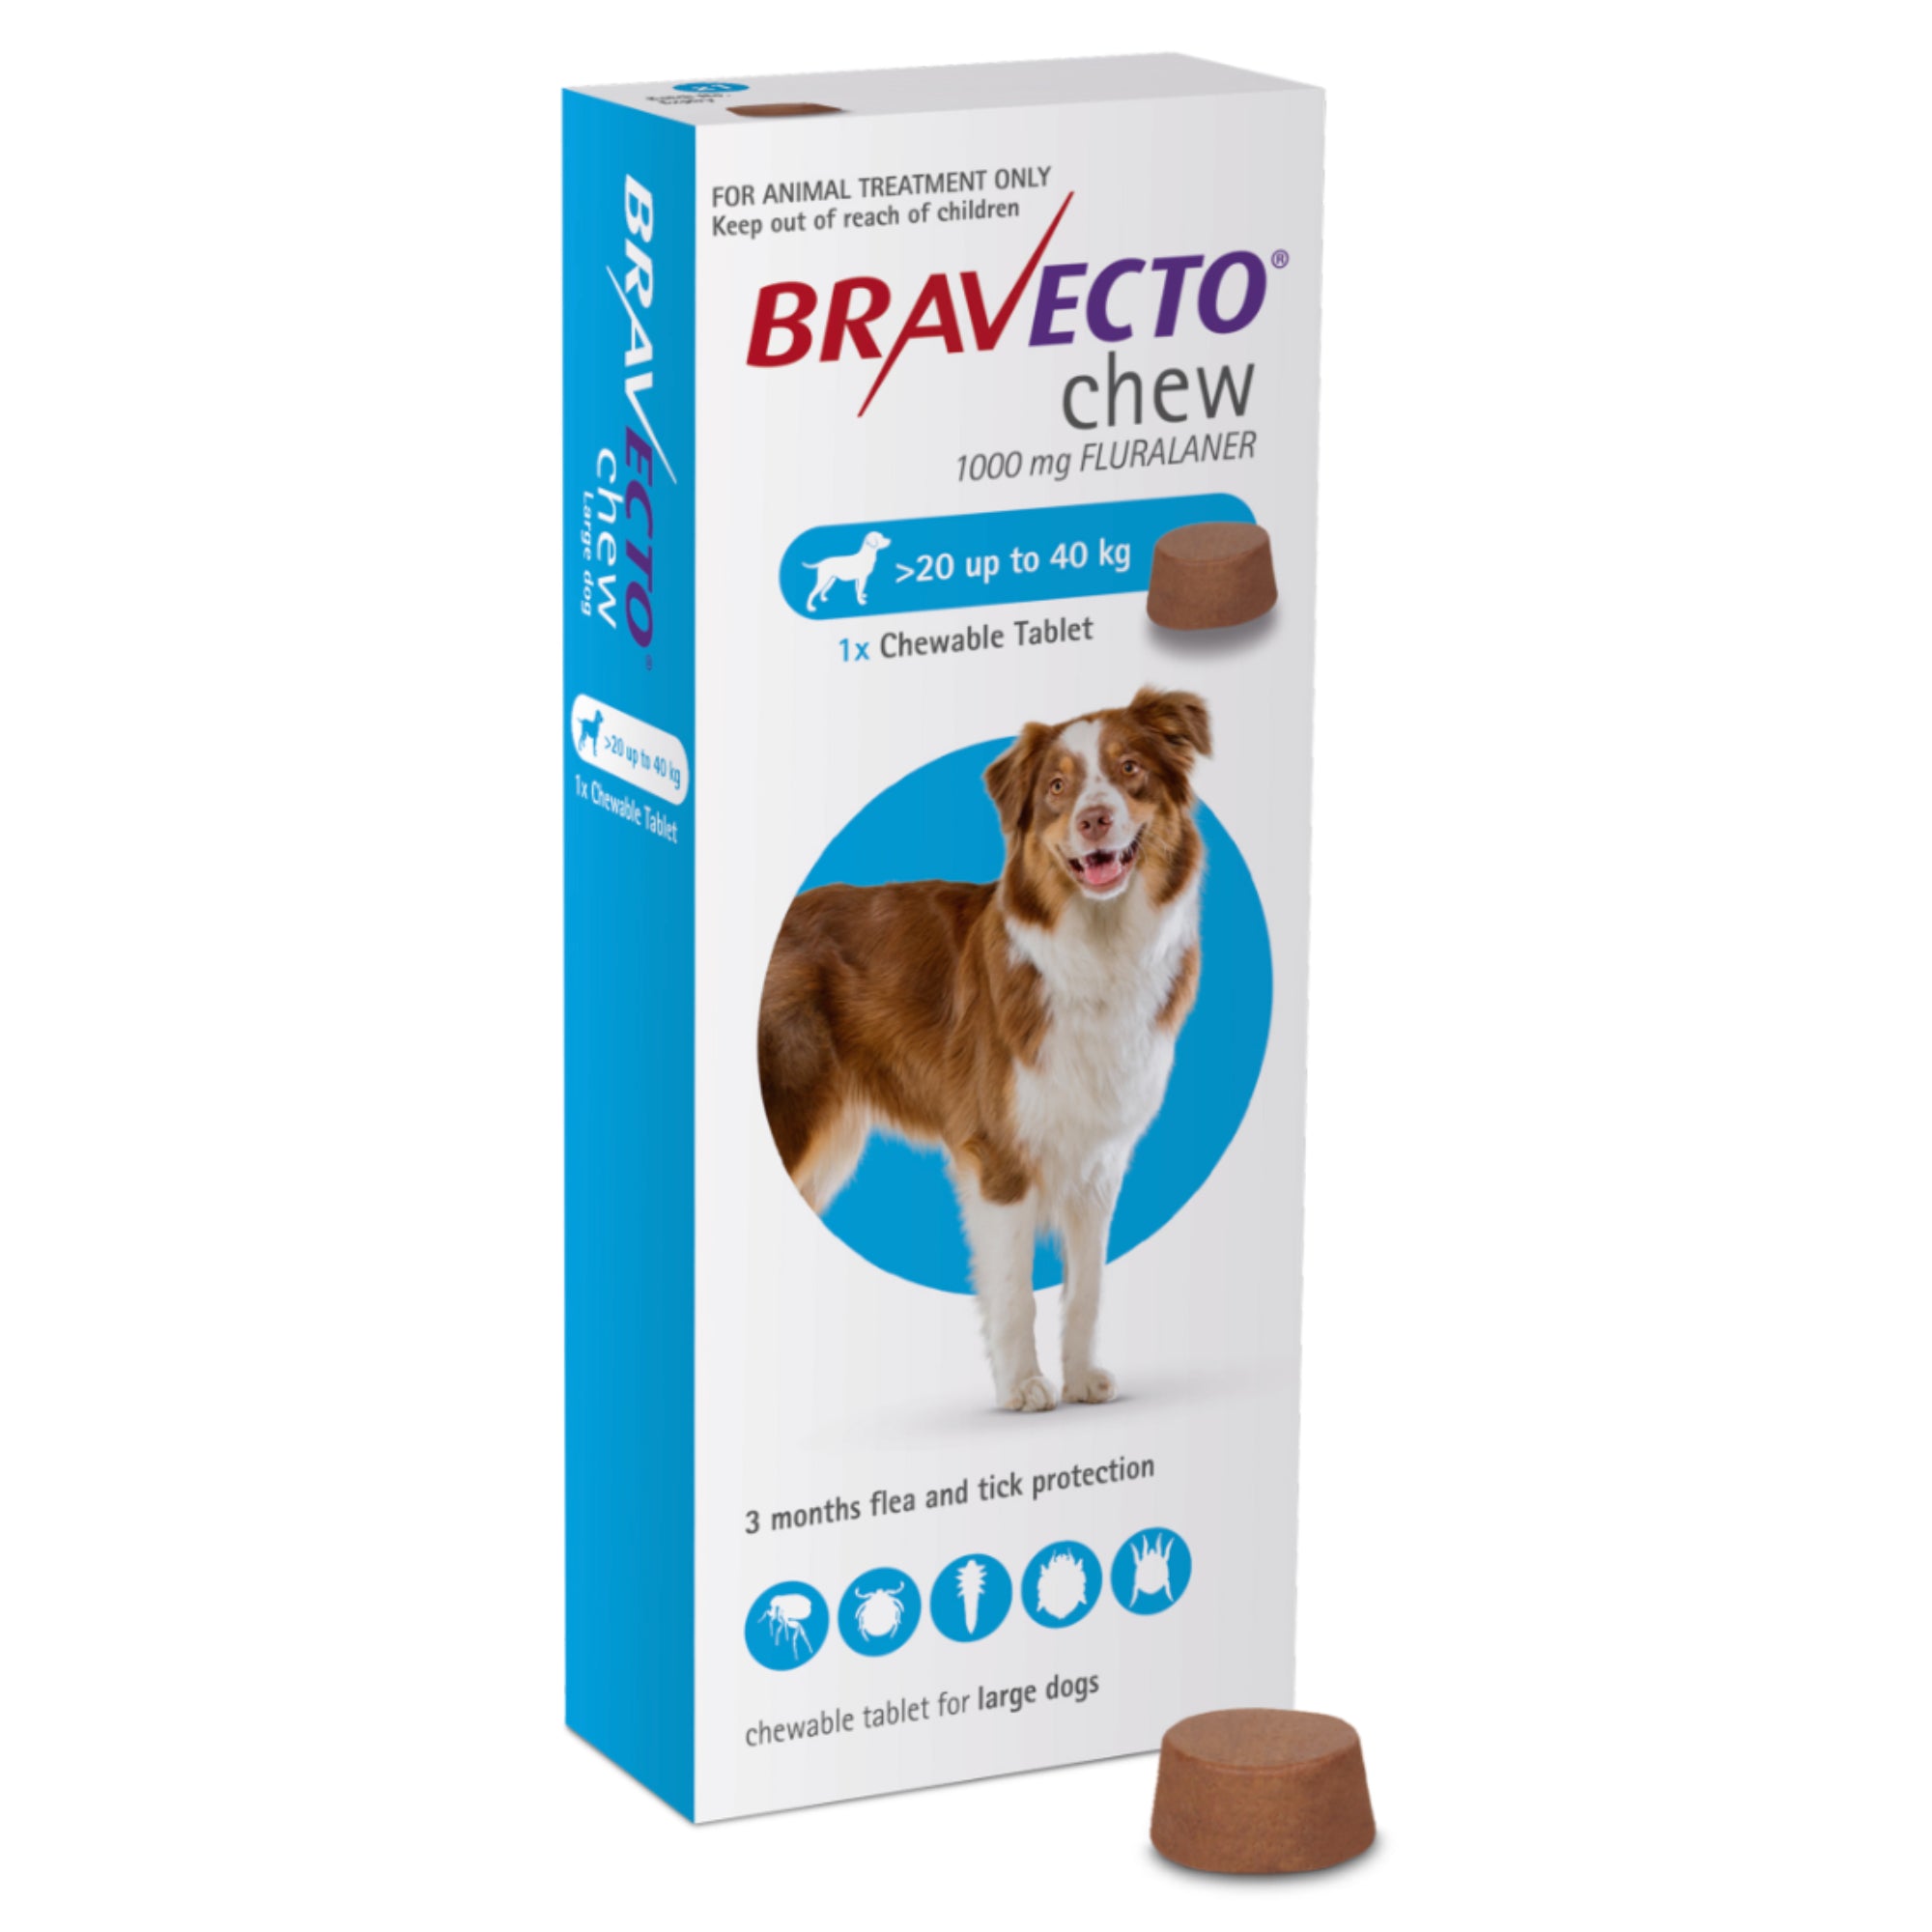 Bravecto Chew For Dogs